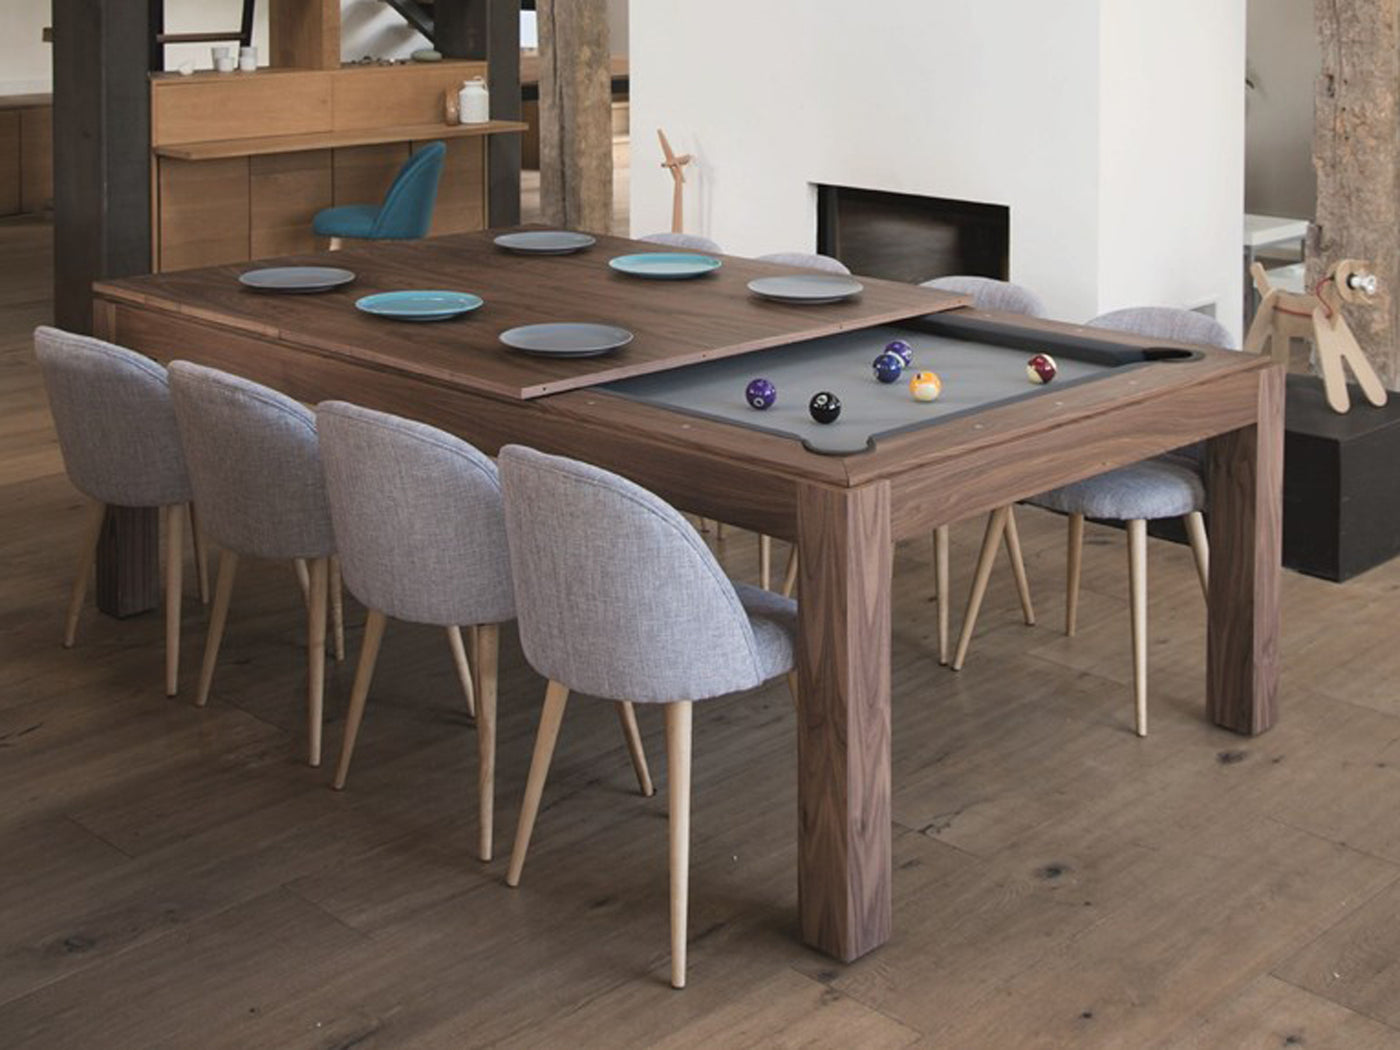 pool table in kitchen